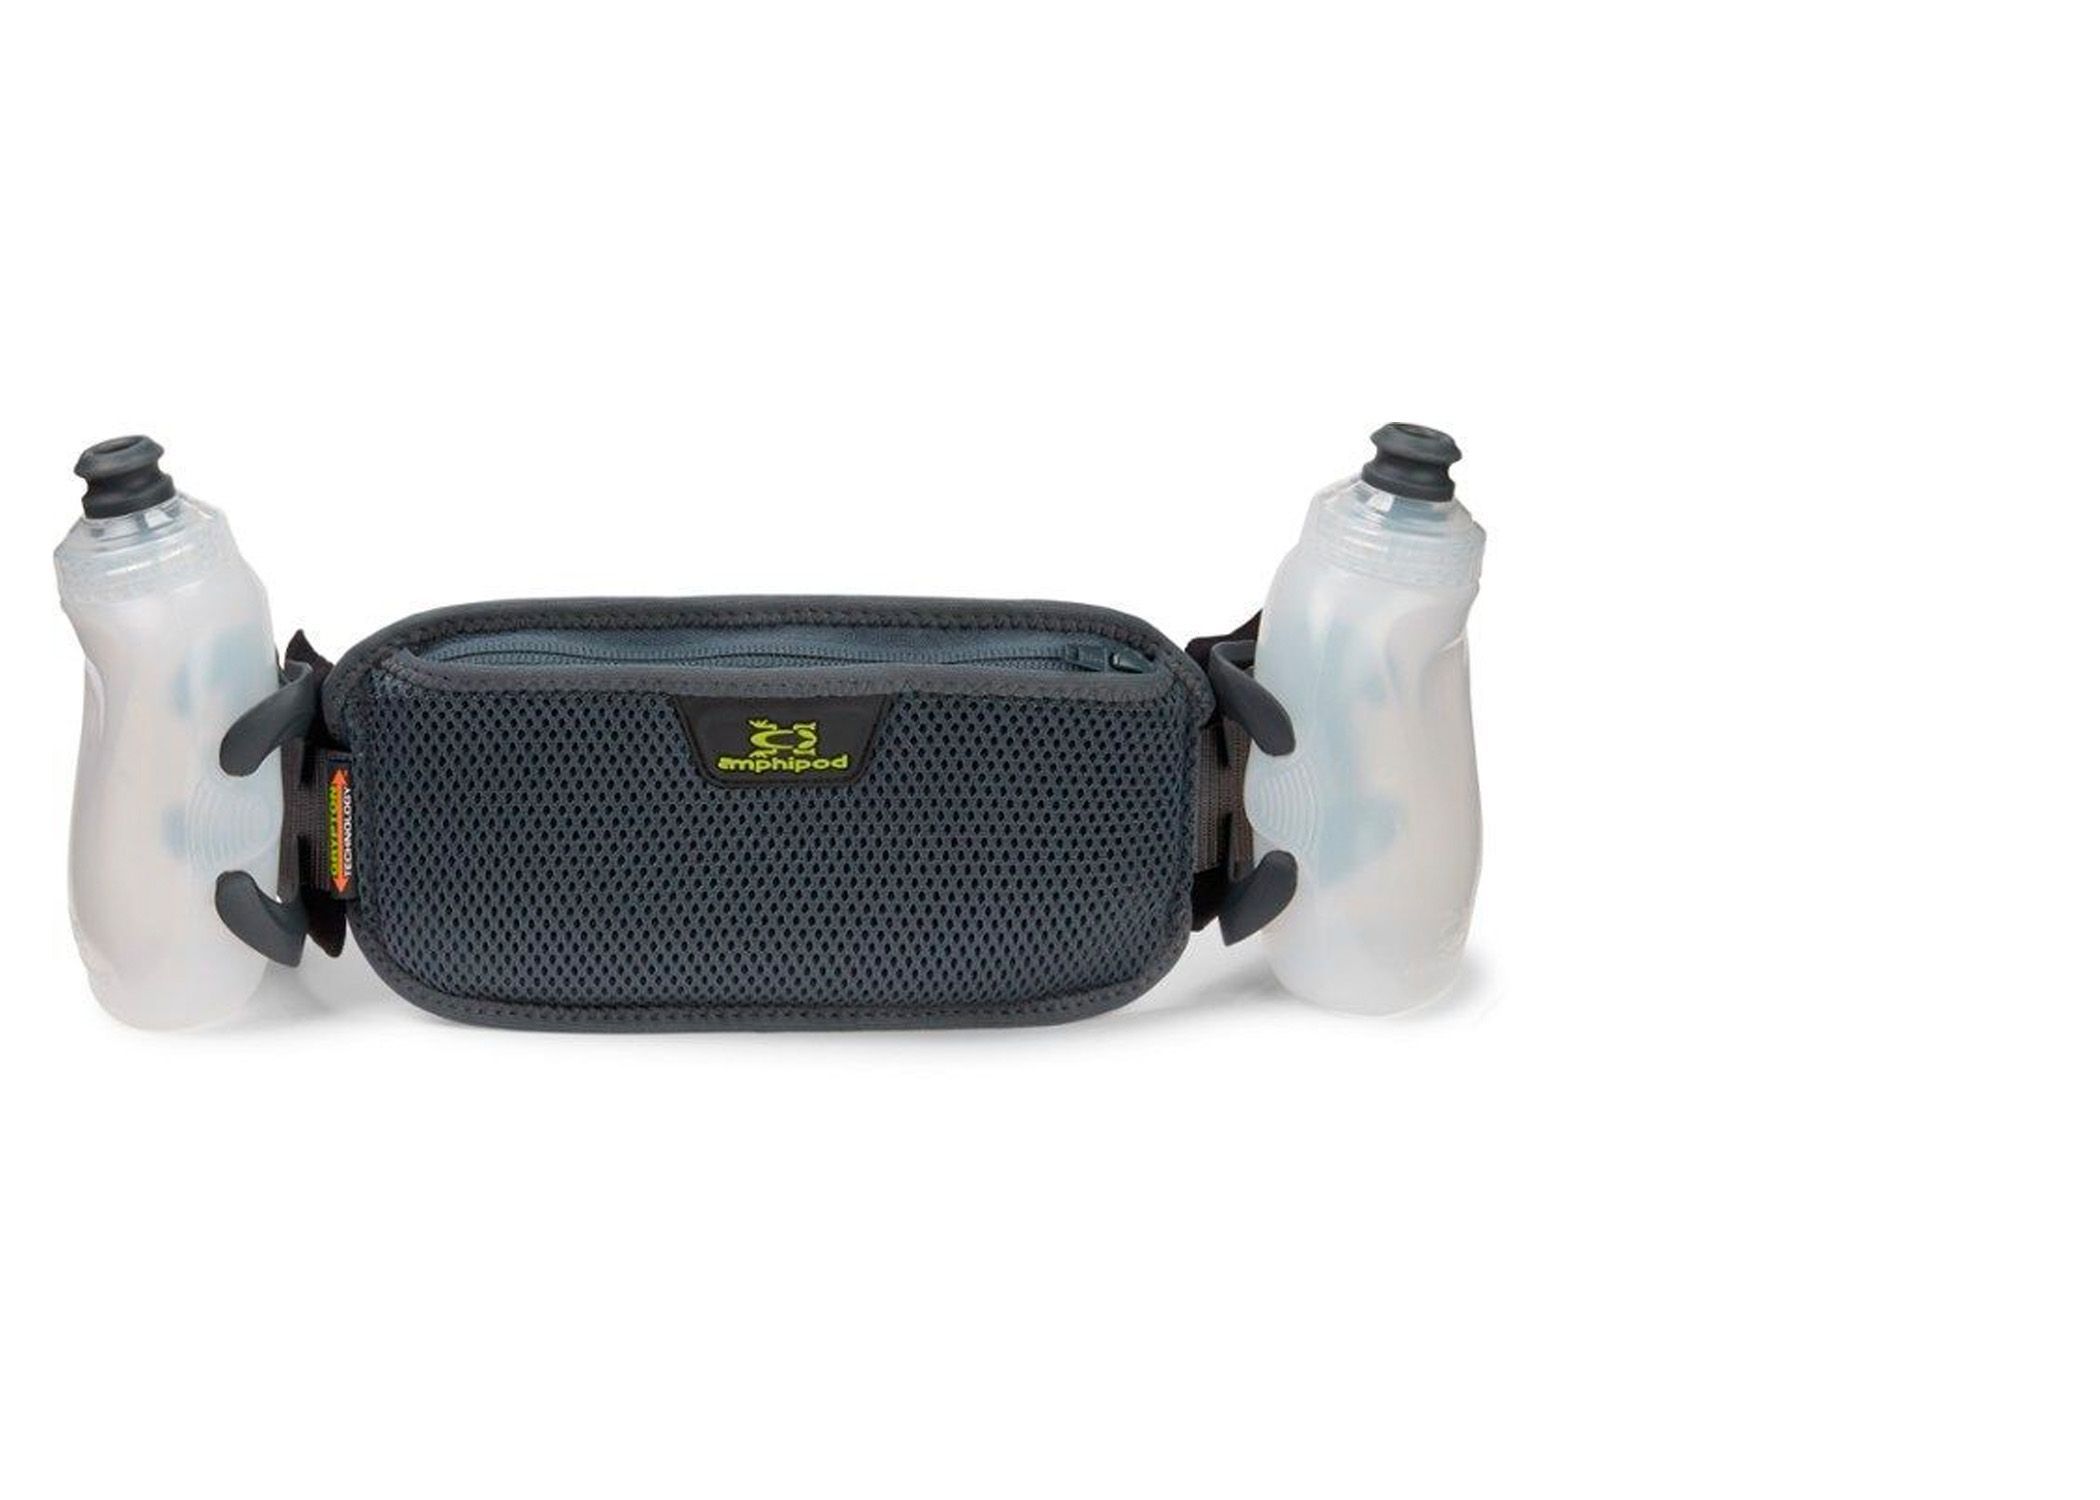 Bring Water Wherever Your Runs Take You With These Hydration Belts